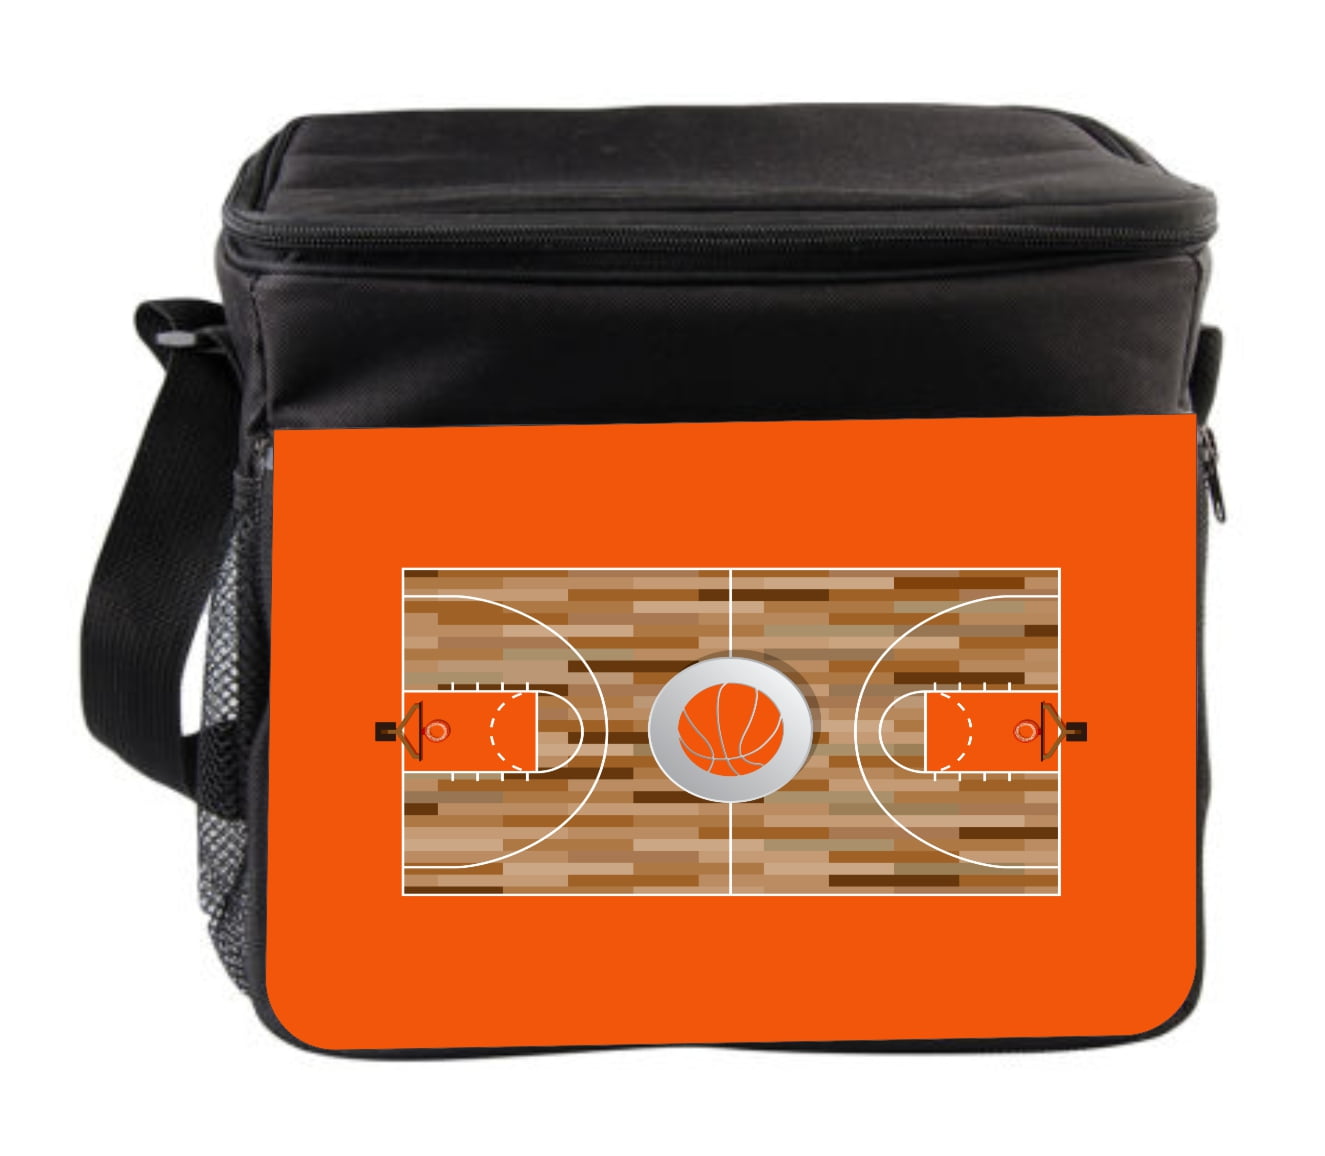 Basketball Field On Old Metal Plate Casual Backpack Unisex Rucksack Durable Travel Daypack Laptop Bag